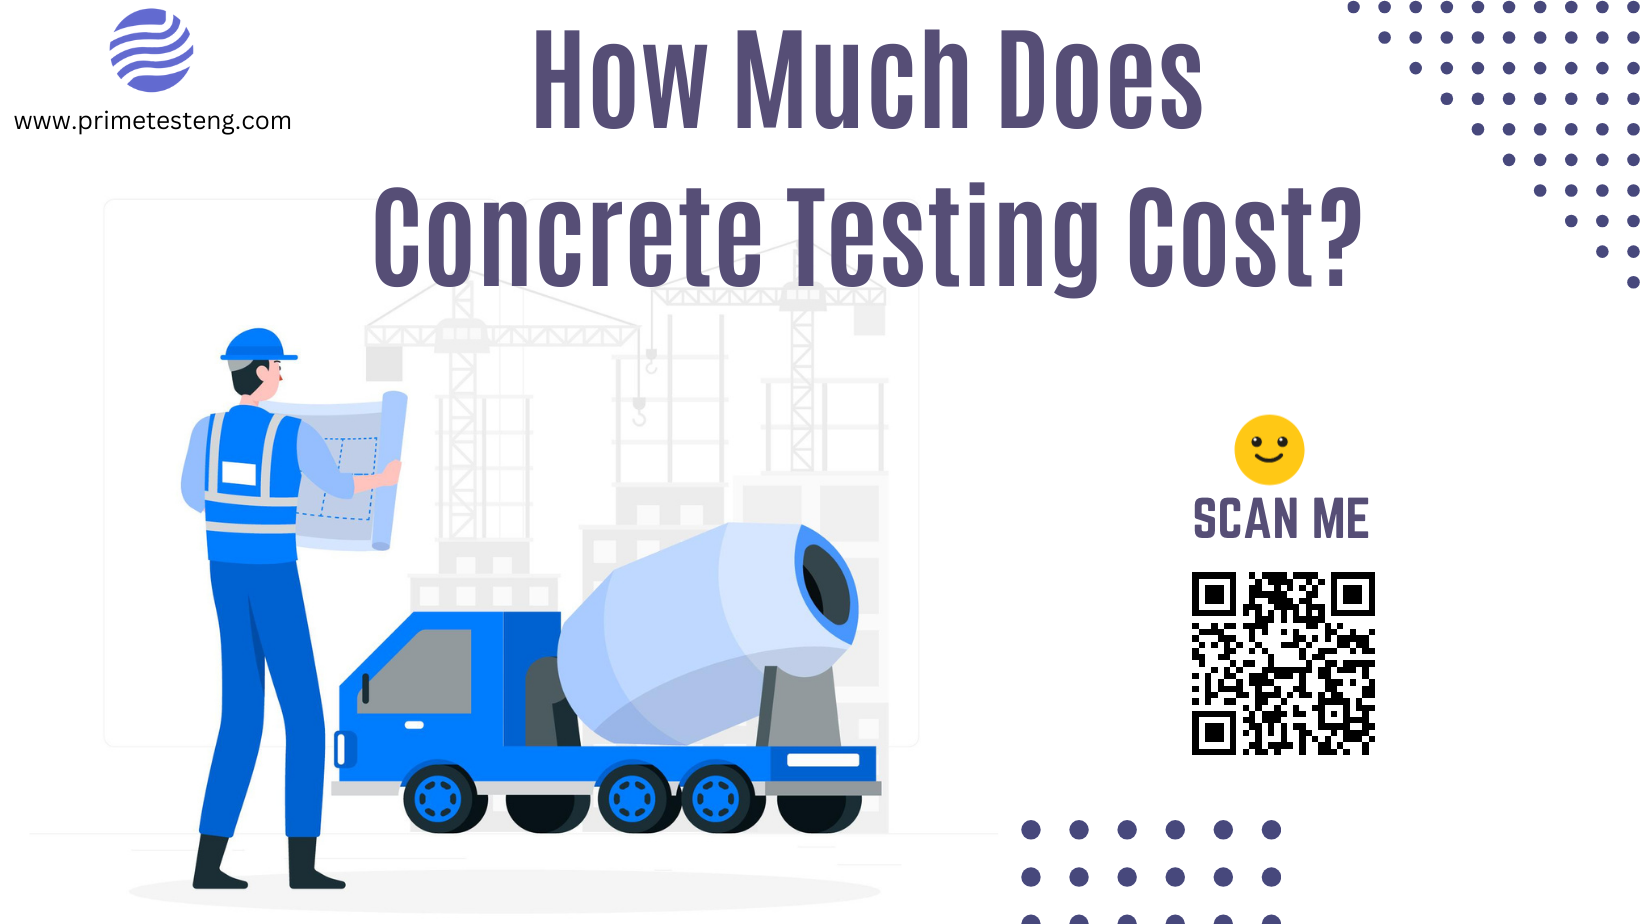 How Much Does Concrete Testing Cost?